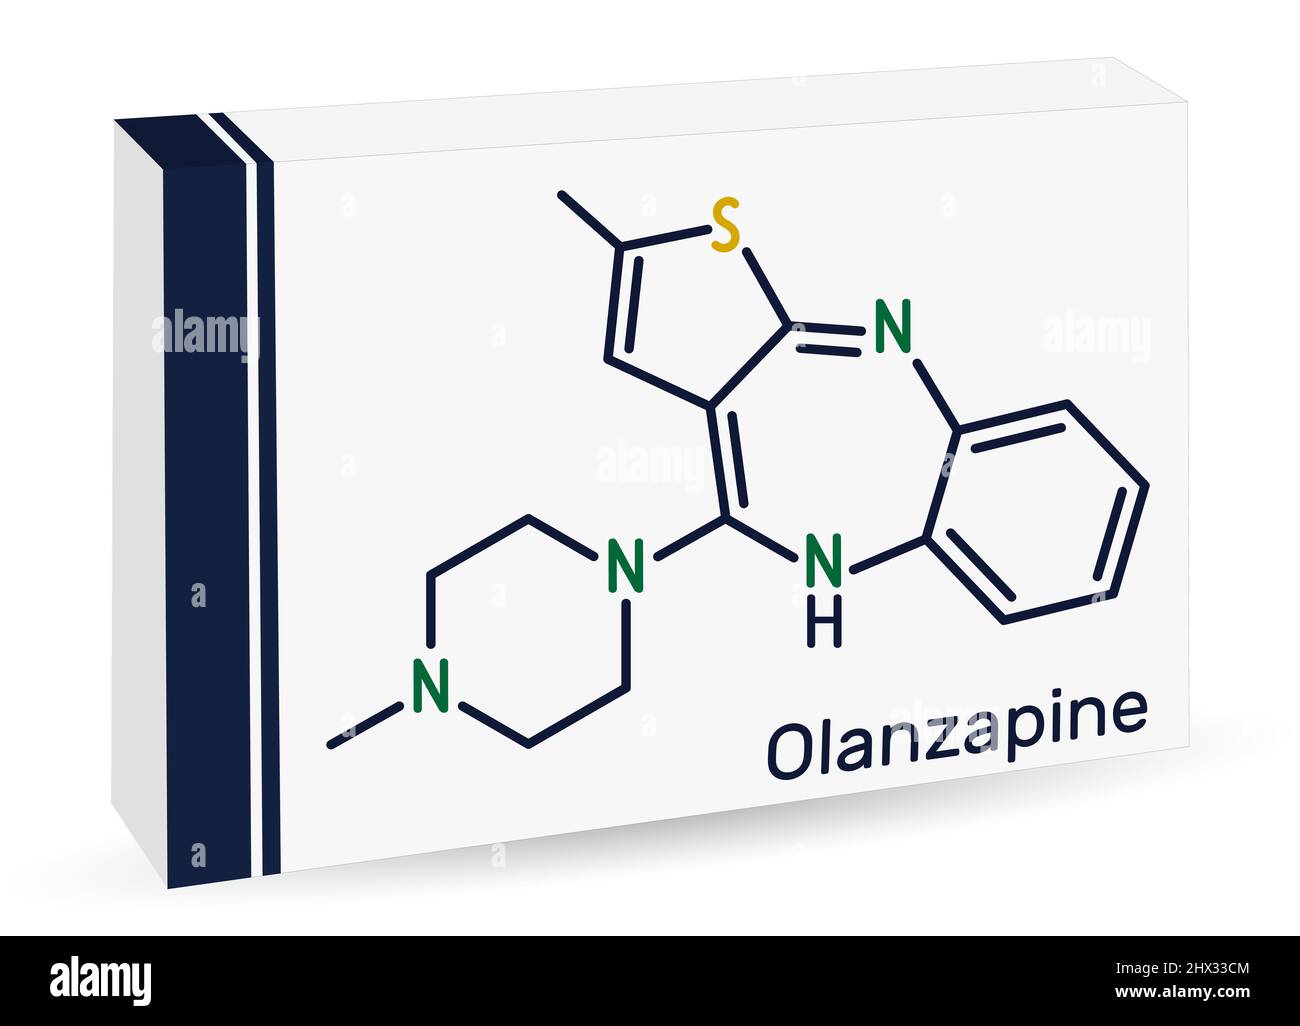 Olanzapine molecule. It is atypical antipsychotic drug for the treatment of schizophrenia, bipolar disorder. Skeletal chemical formula. Paper packagin Stock Vector